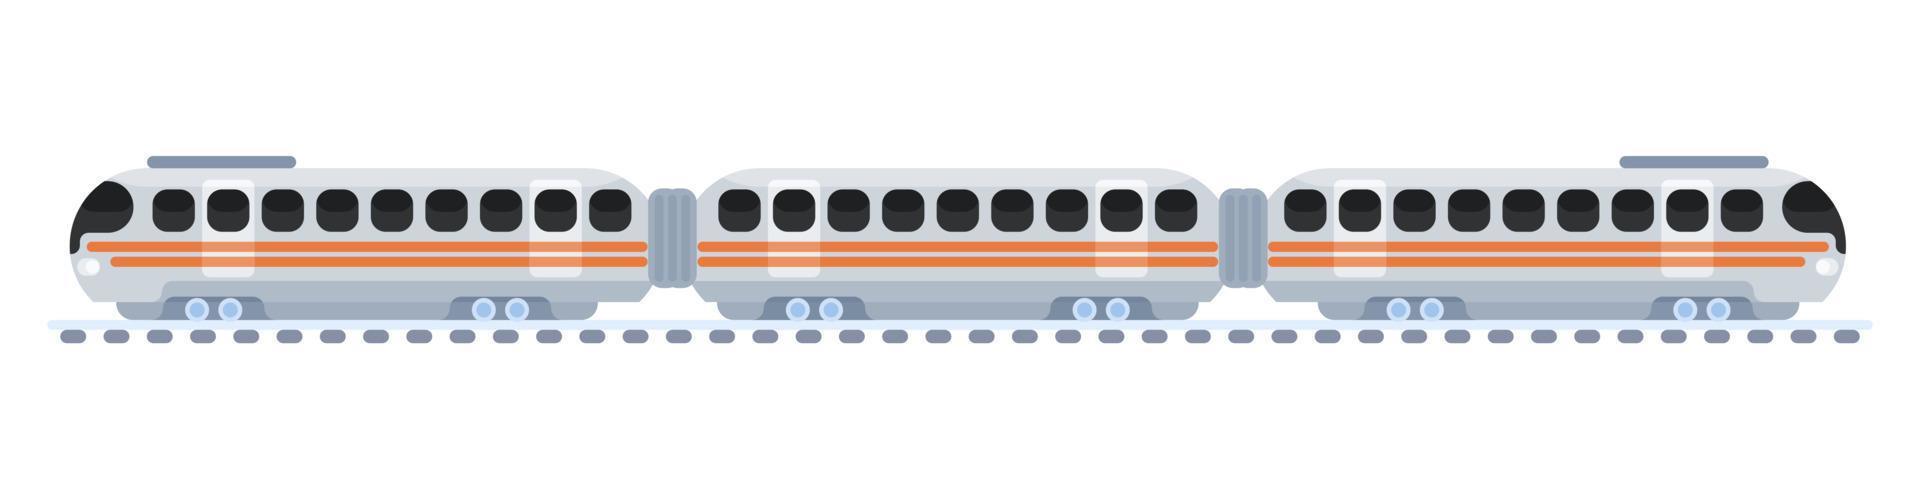 train on rails electric new drawing. vector flat